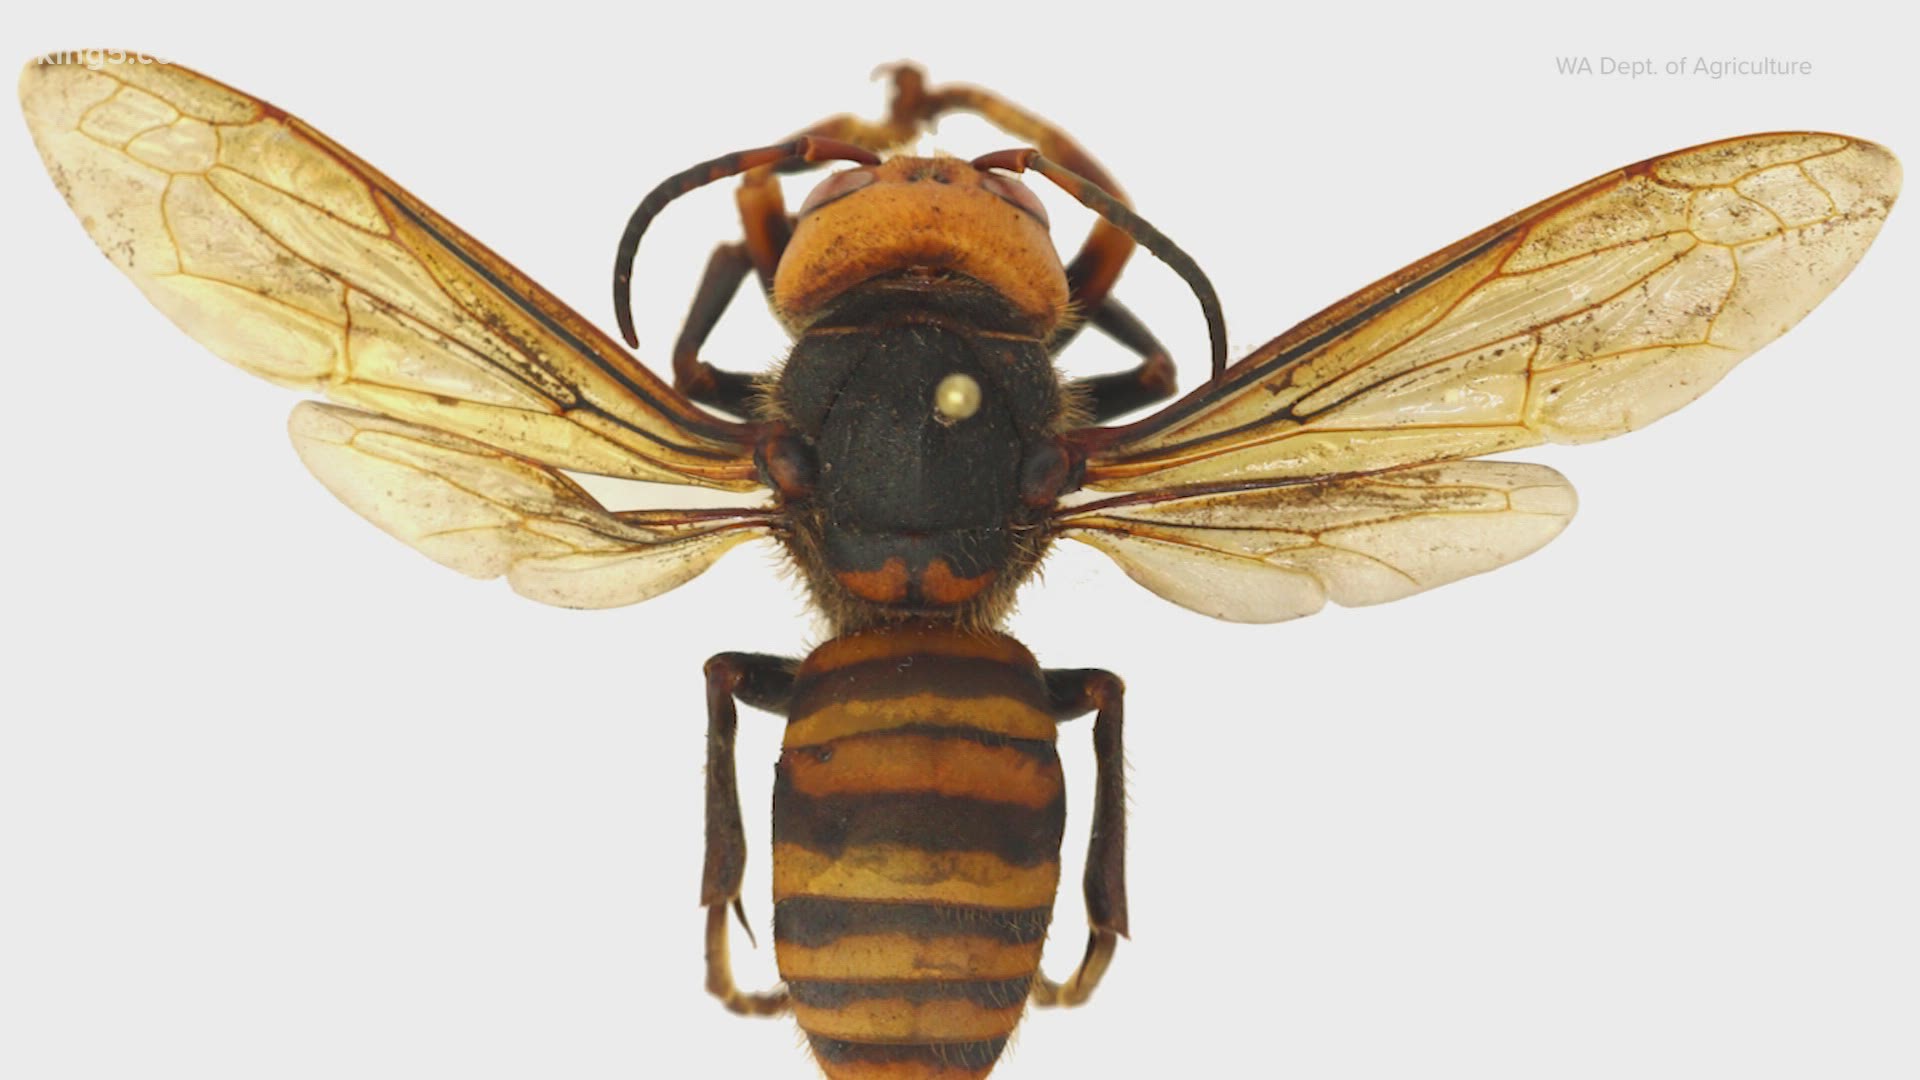 The Washington State Department of Agriculture said fake warning signs about Asian giant hornets were posted at several trailheads.